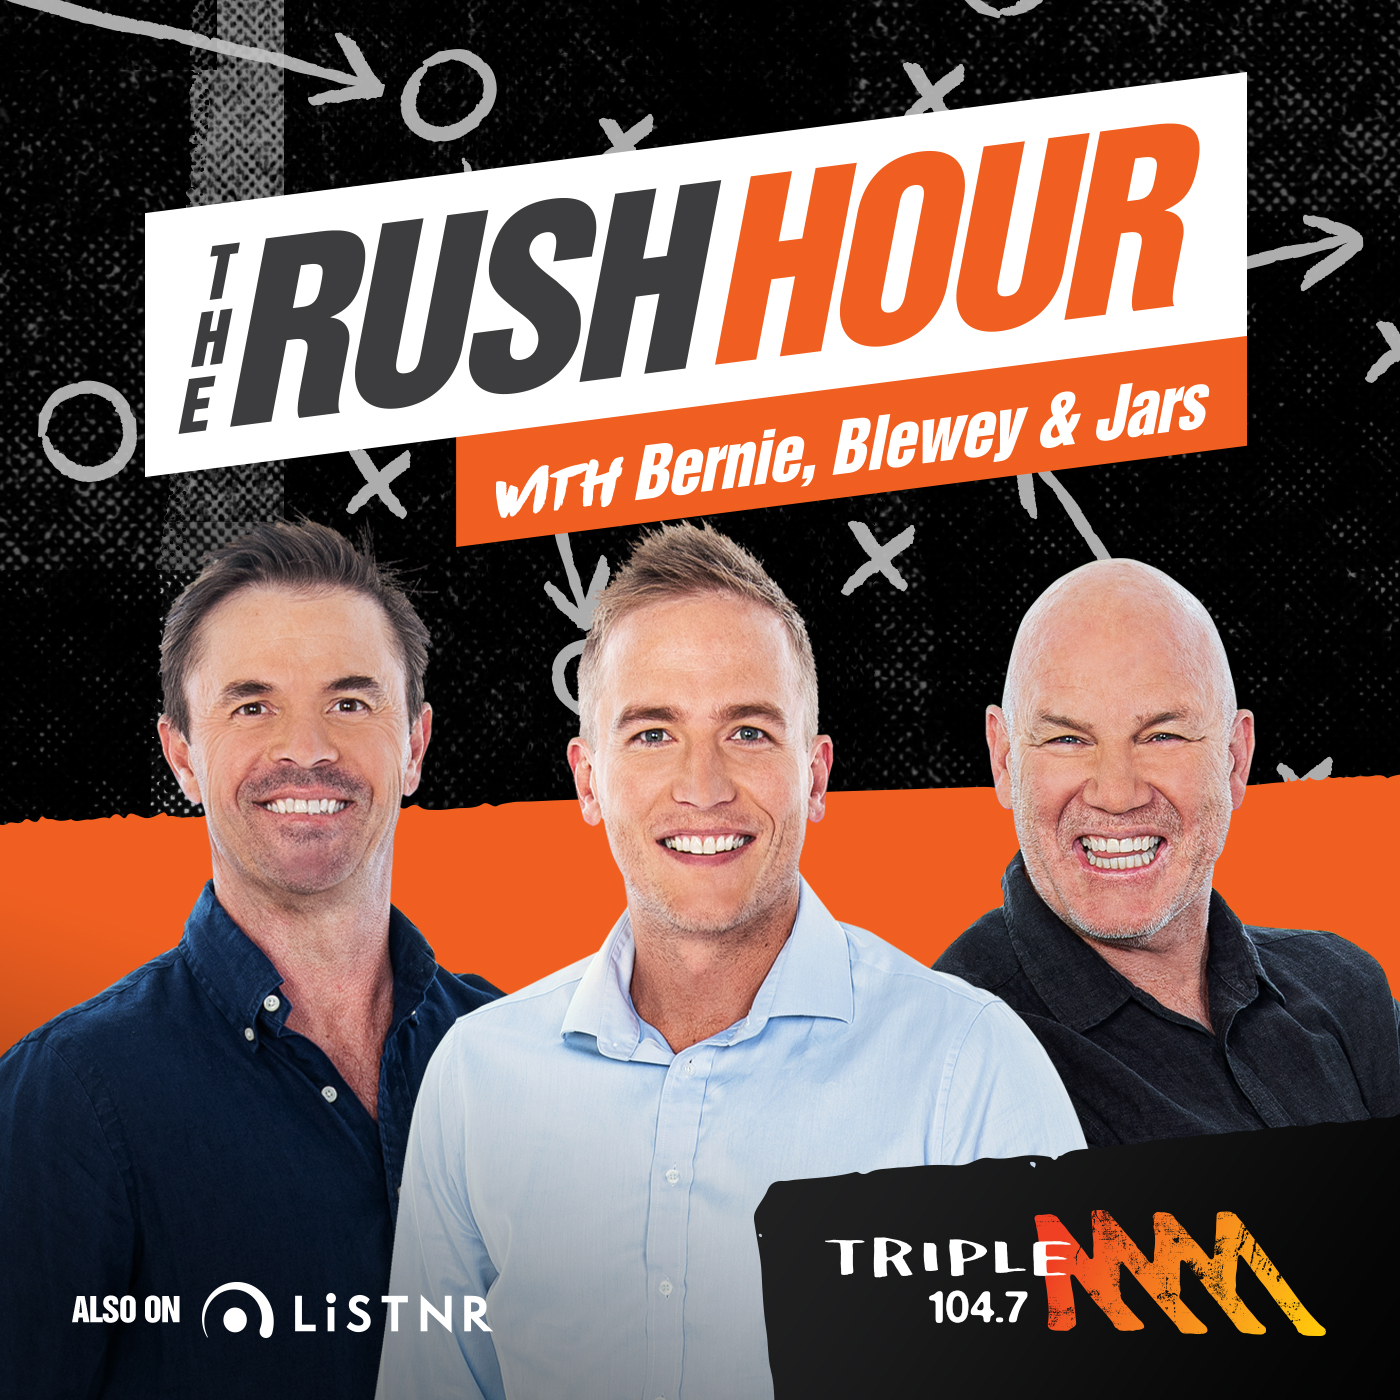 FULL SHOW | The Rush Hour is boring without Blewey's spice